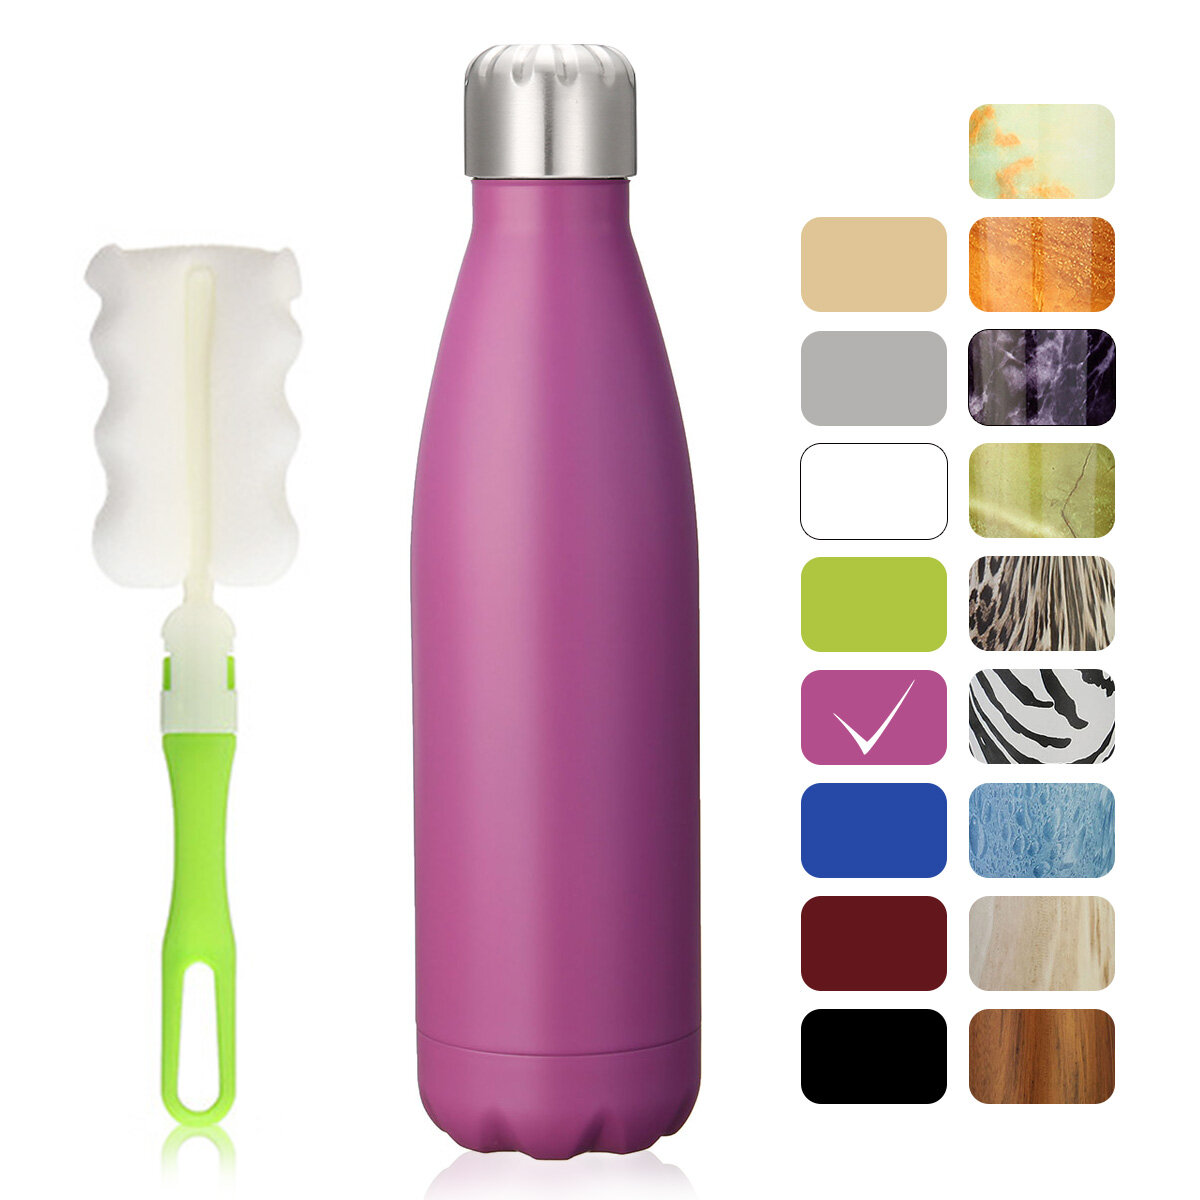 best price,king,500ml,insulated,stainless,steel,water,vacuum,bottle,eu,discount